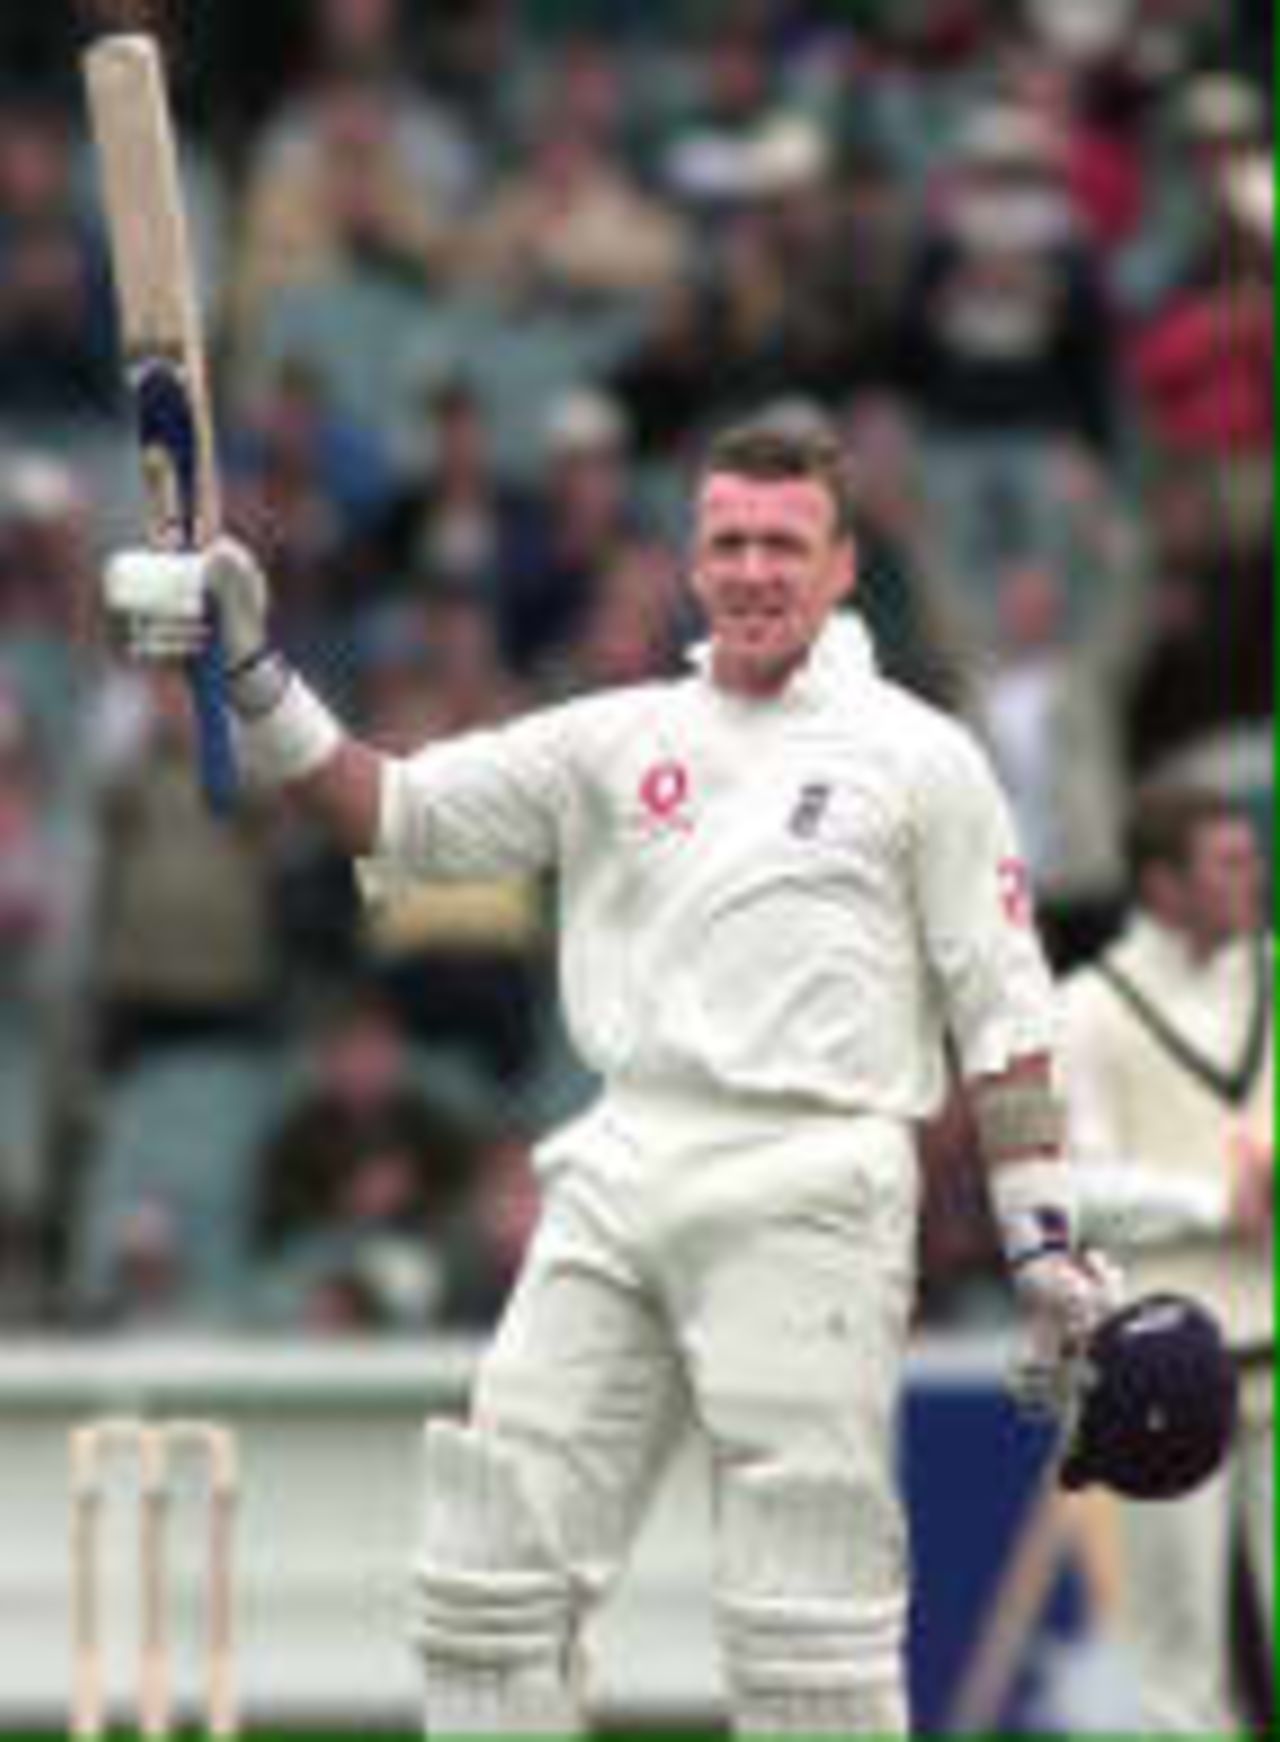 Alec Stewart acknowledges the applause after scoring his century The Ashes, 1998/99, 4th Test Australia v England Melbourne Cricket Ground 27 December 1998